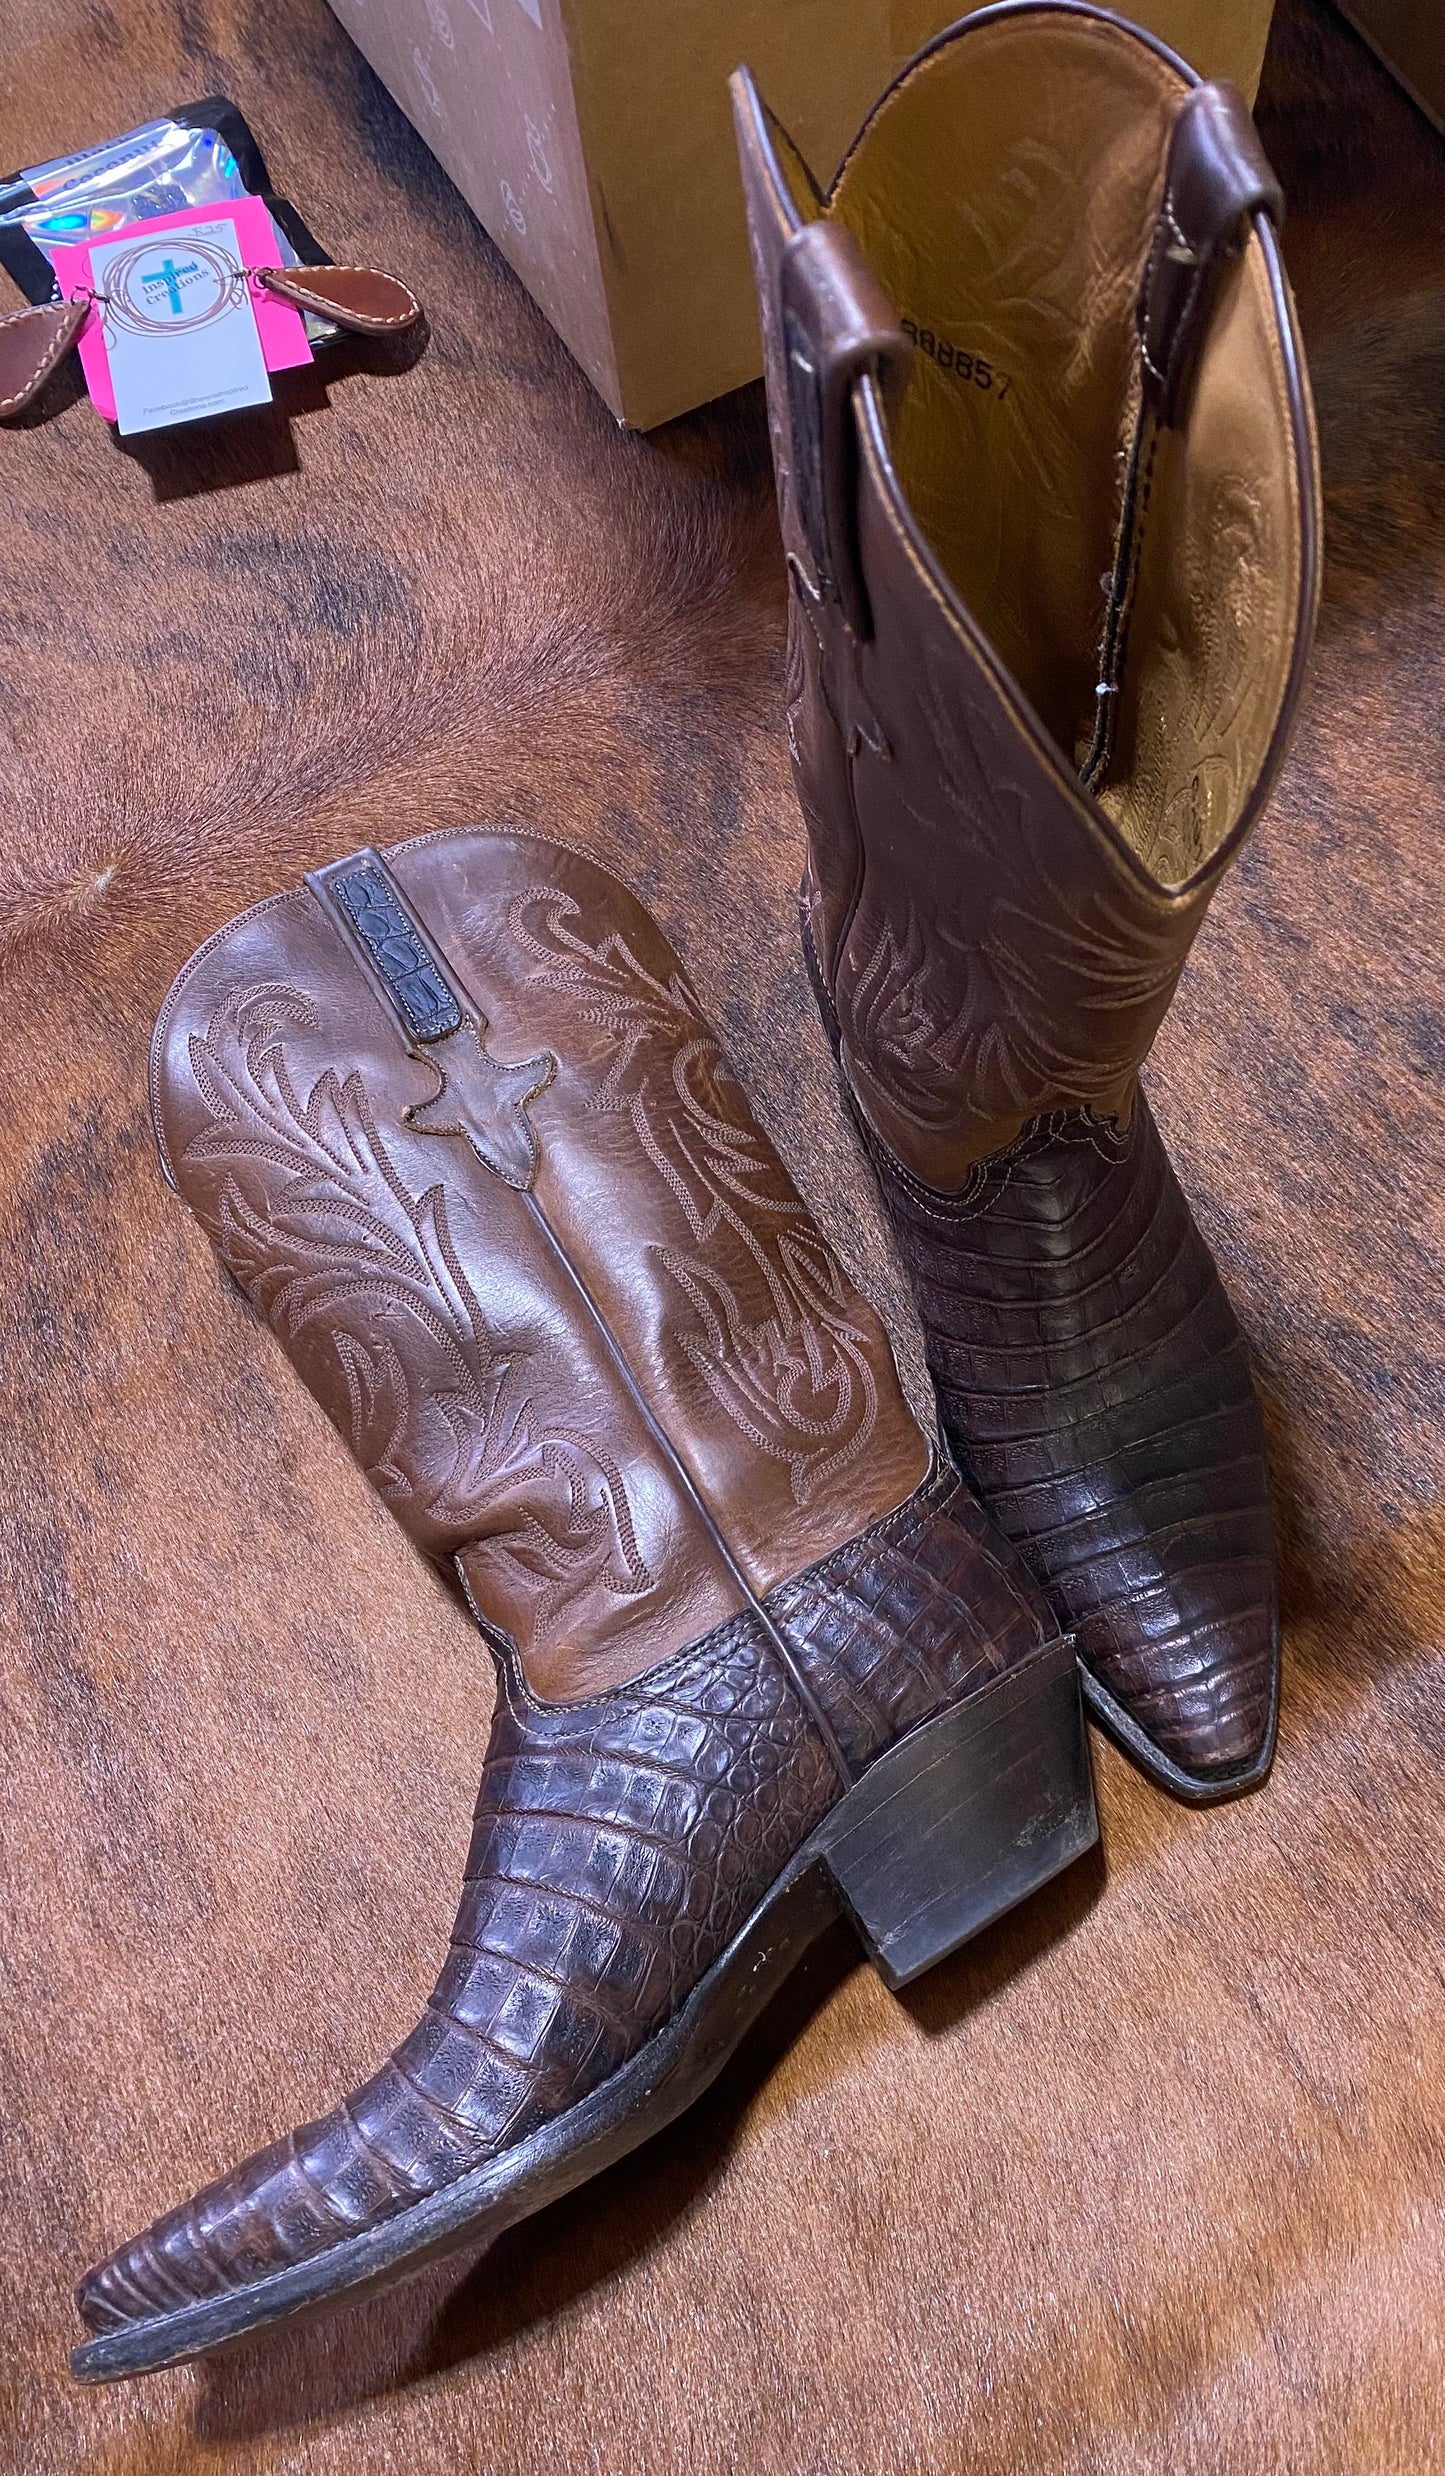 Lucchese boot